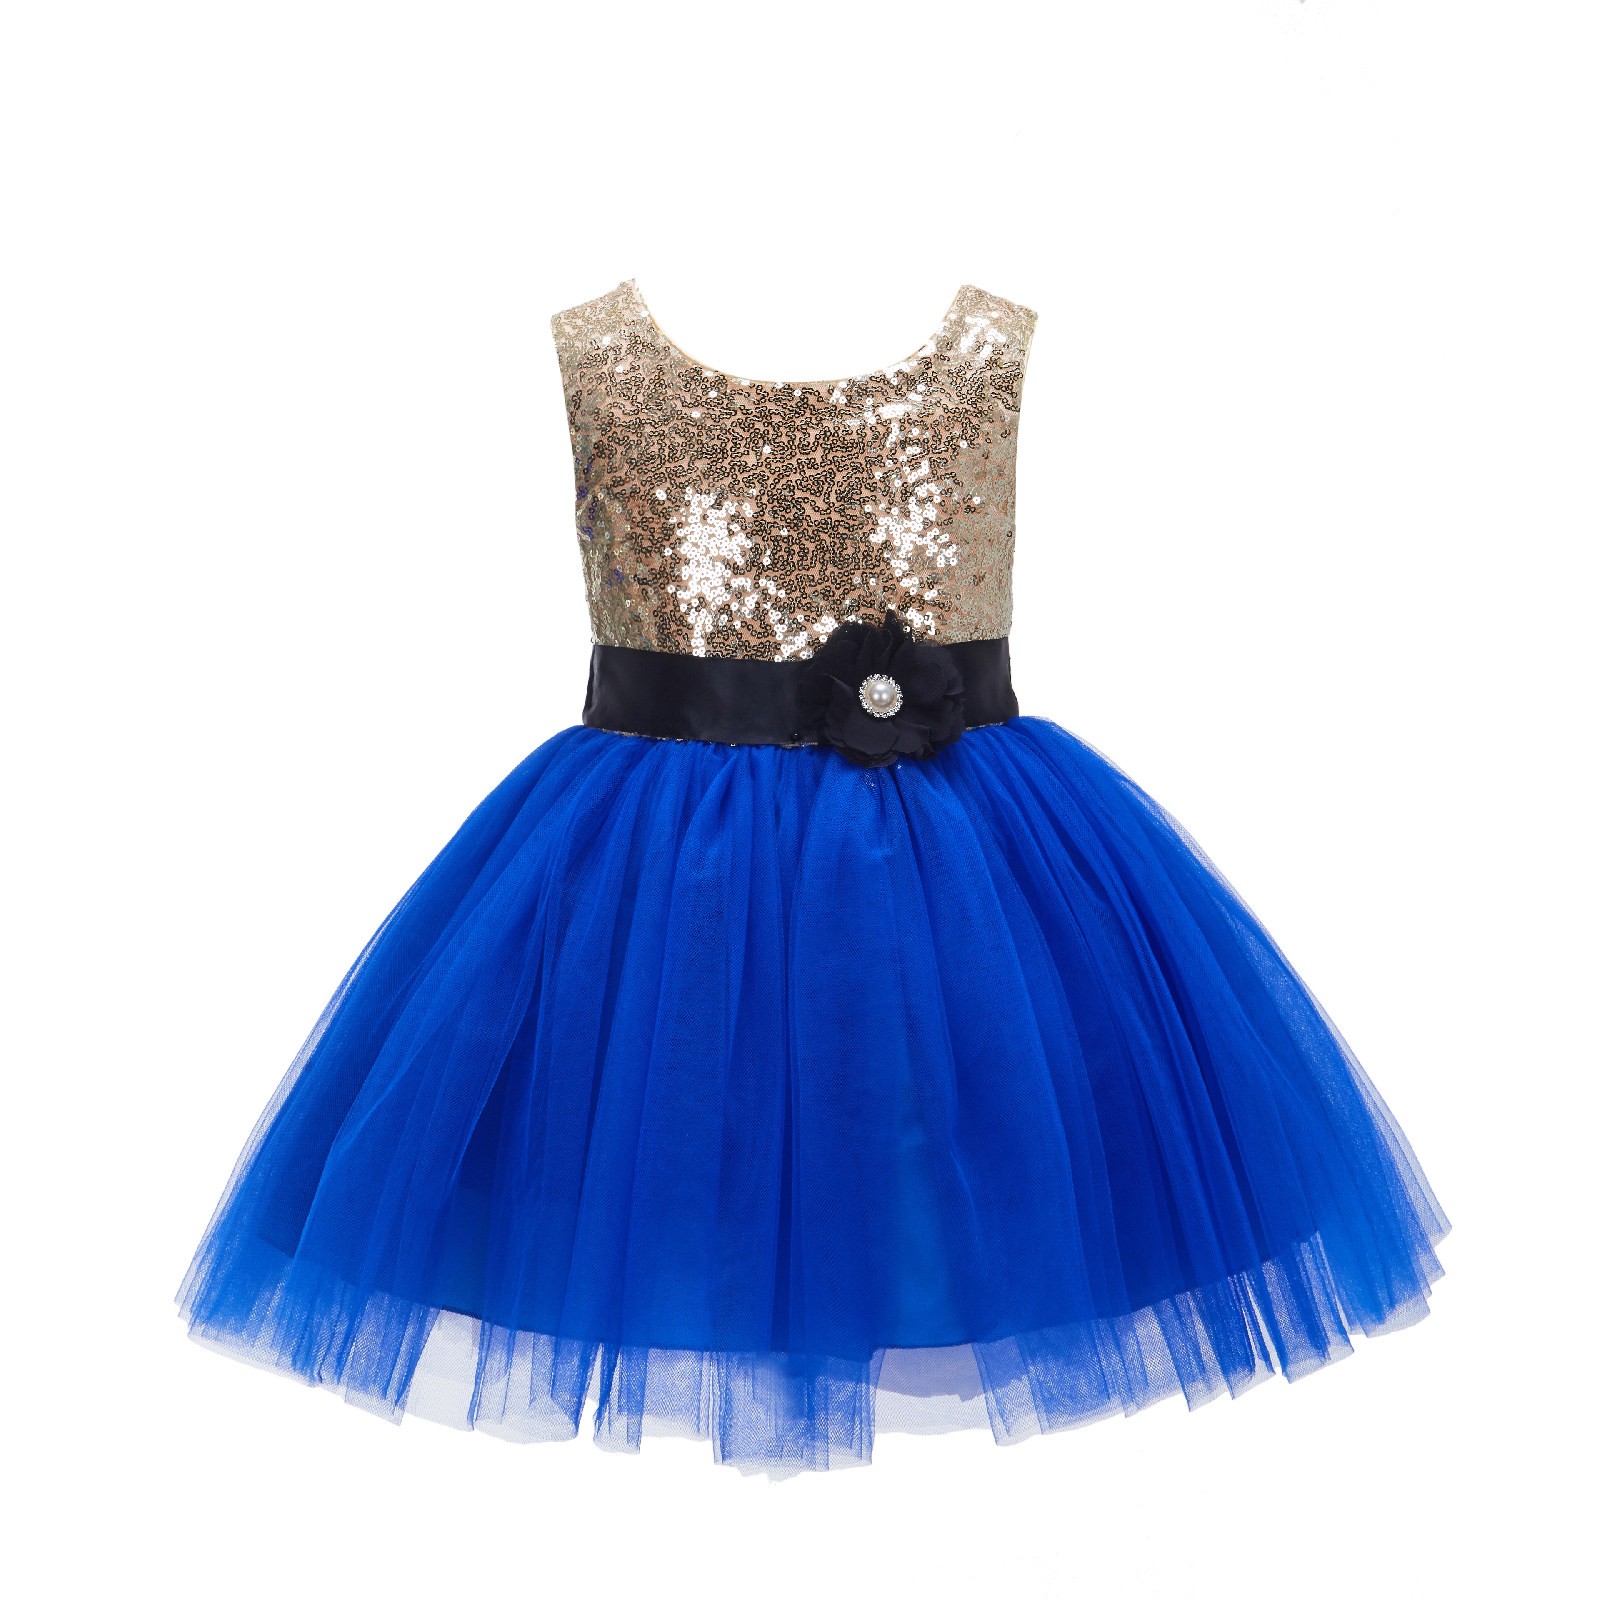 royal blue and black gown